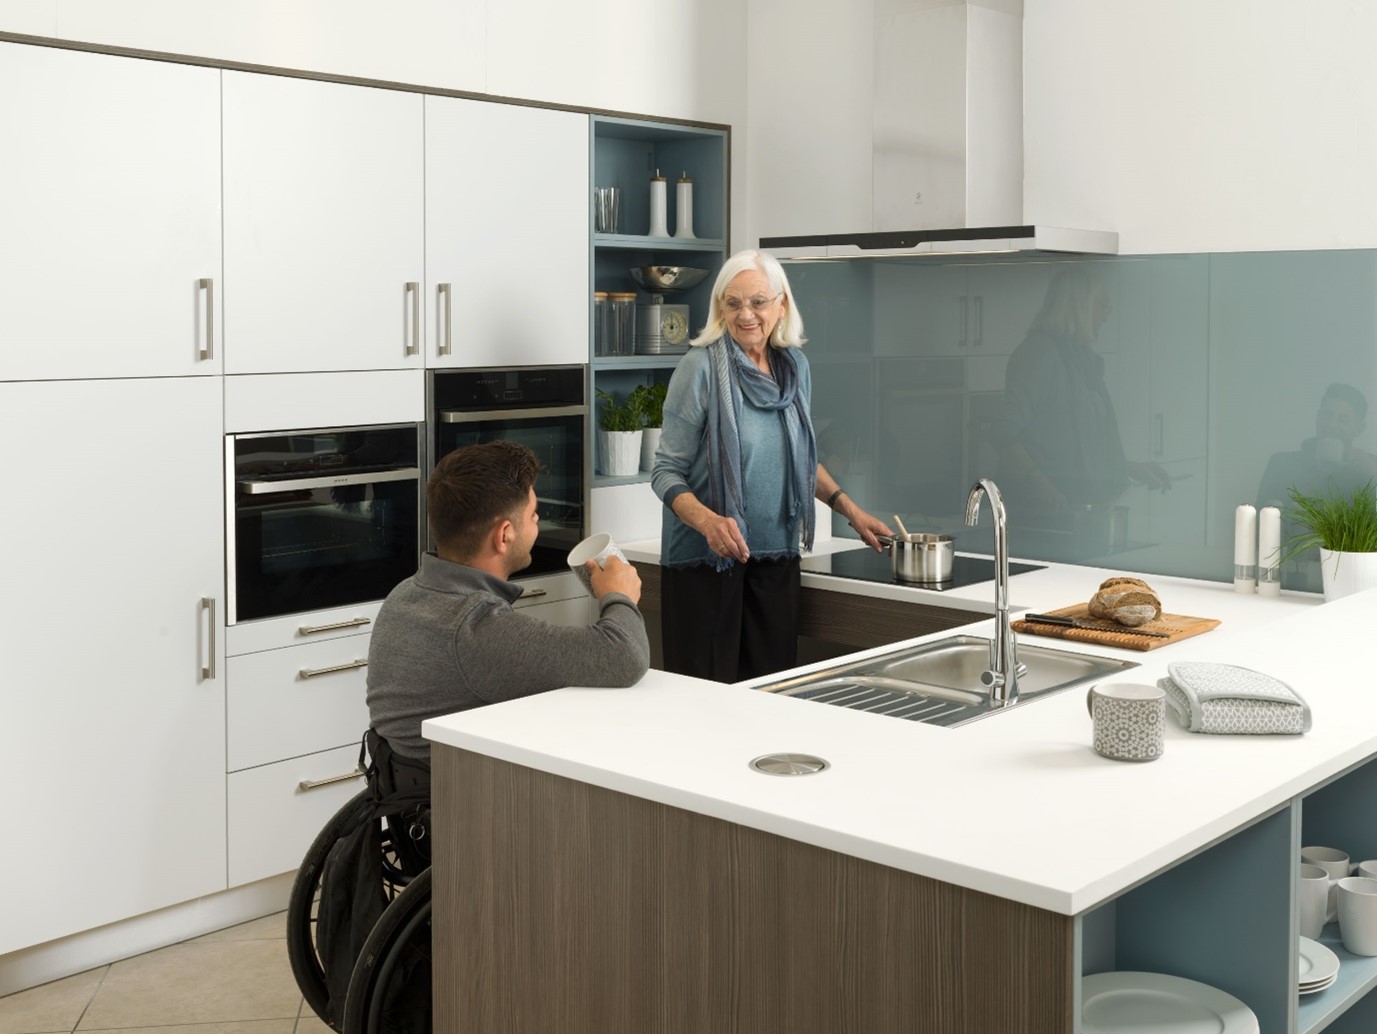 Kitchens for Disabled, Inclusive Kitchens